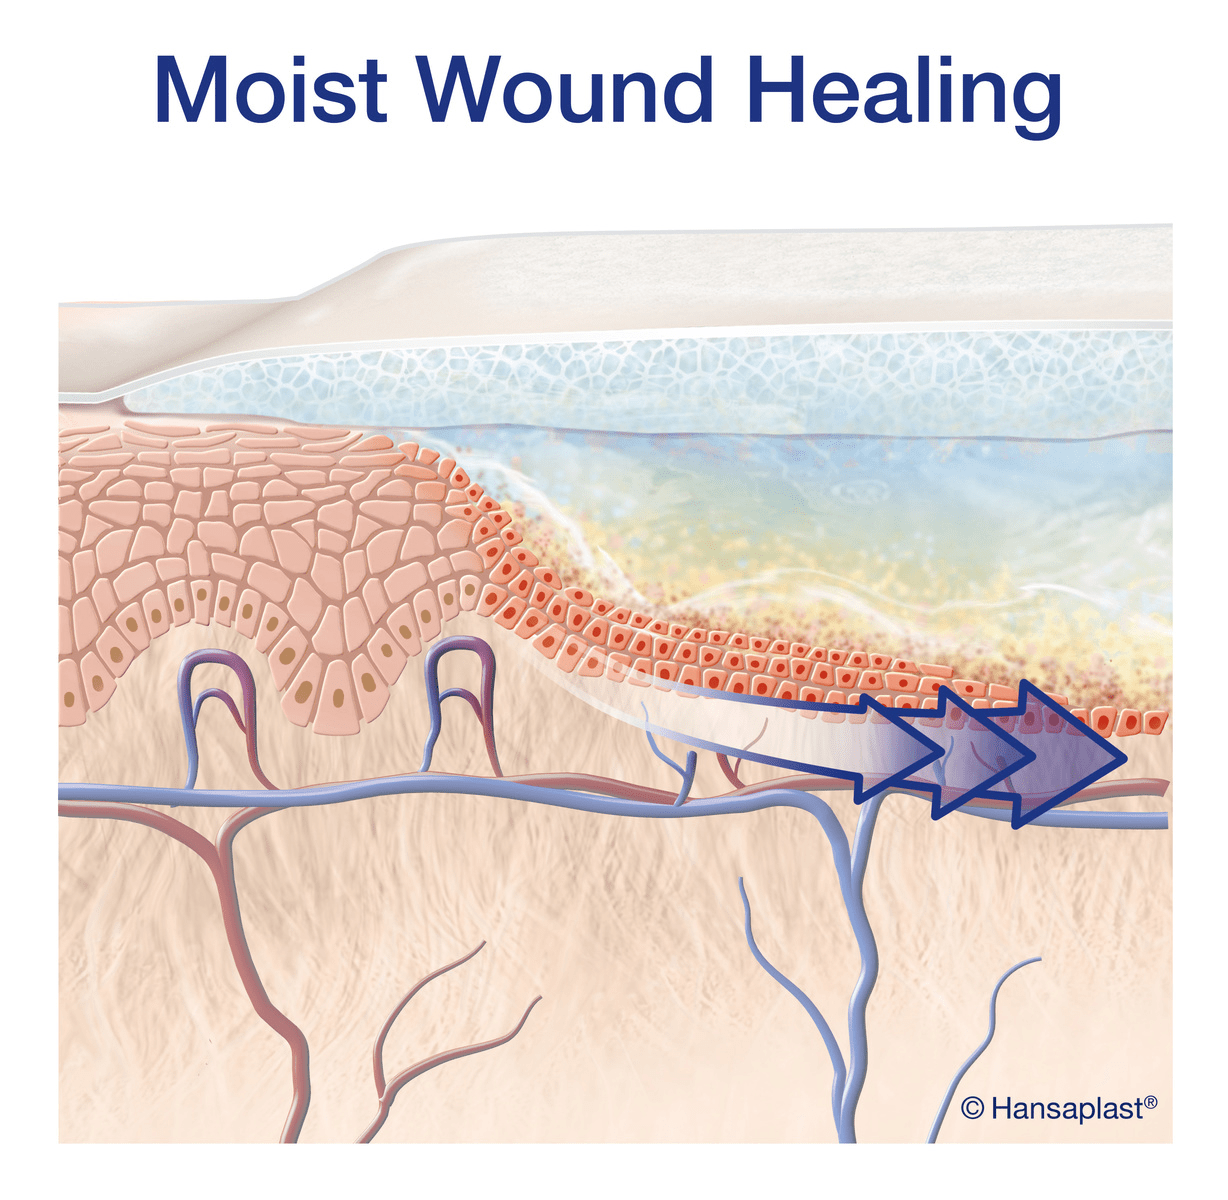 Image of moist wound healing